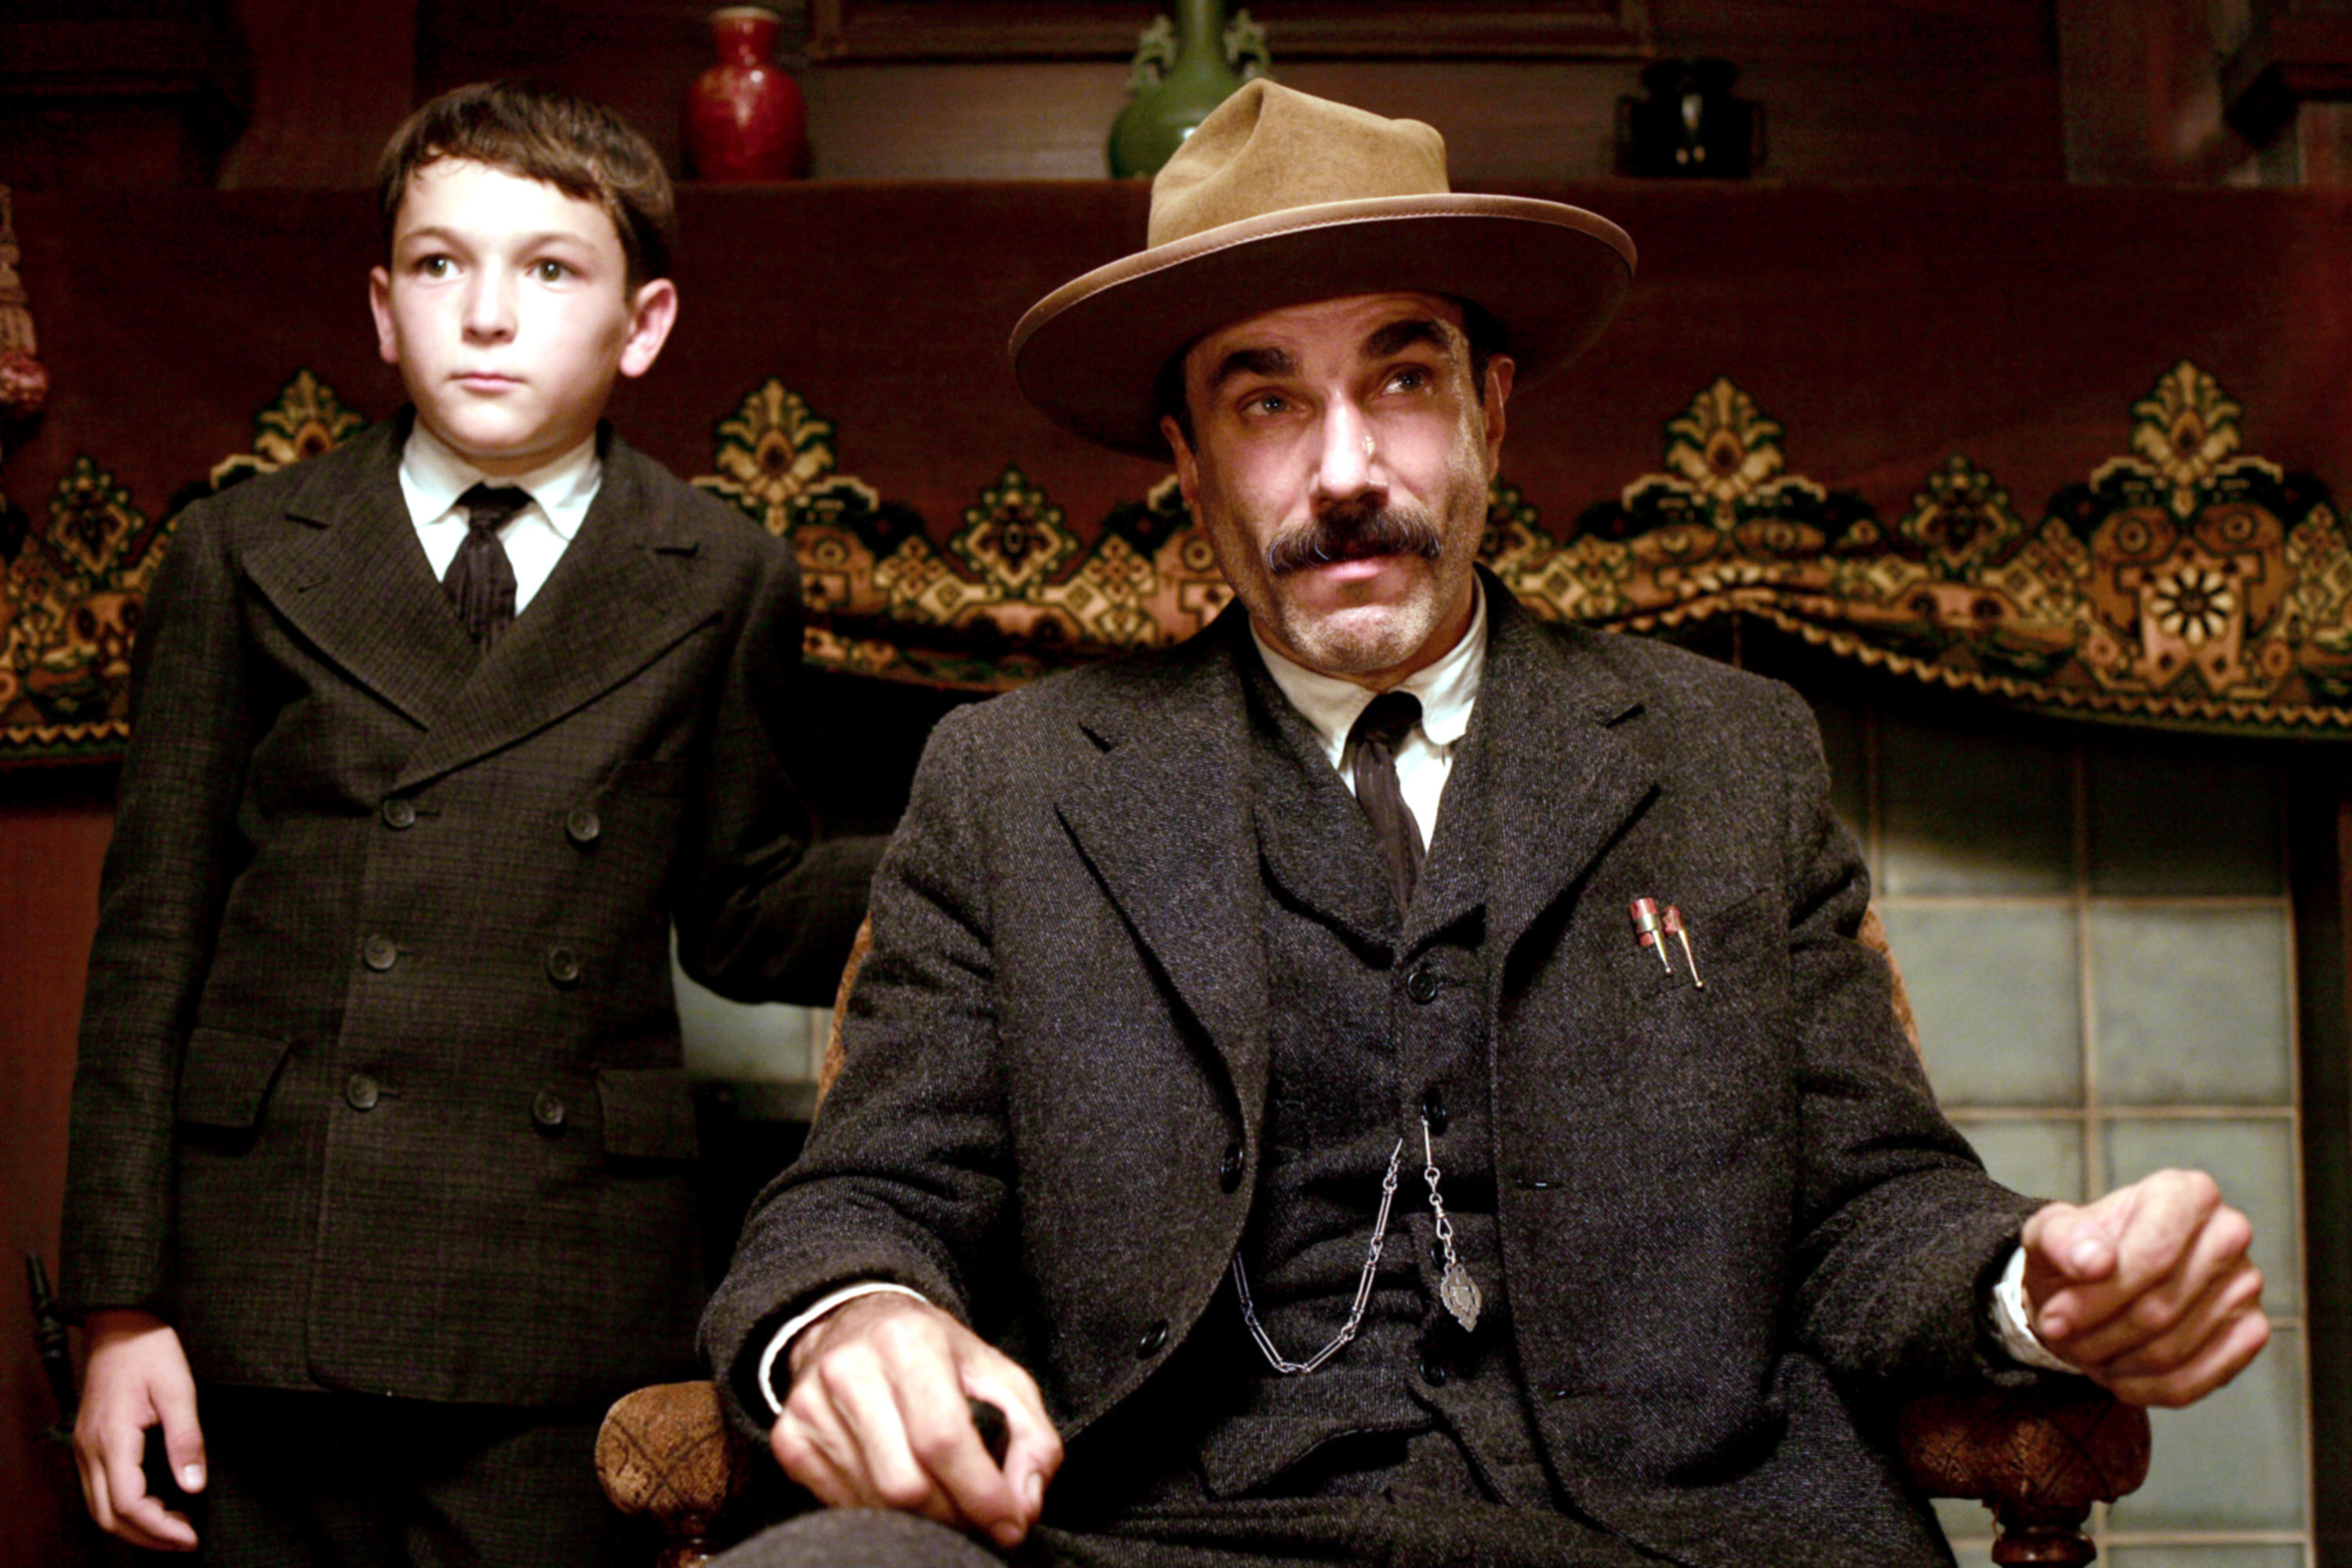 Dillon Freasier stands beside Daniel Day-Lewis